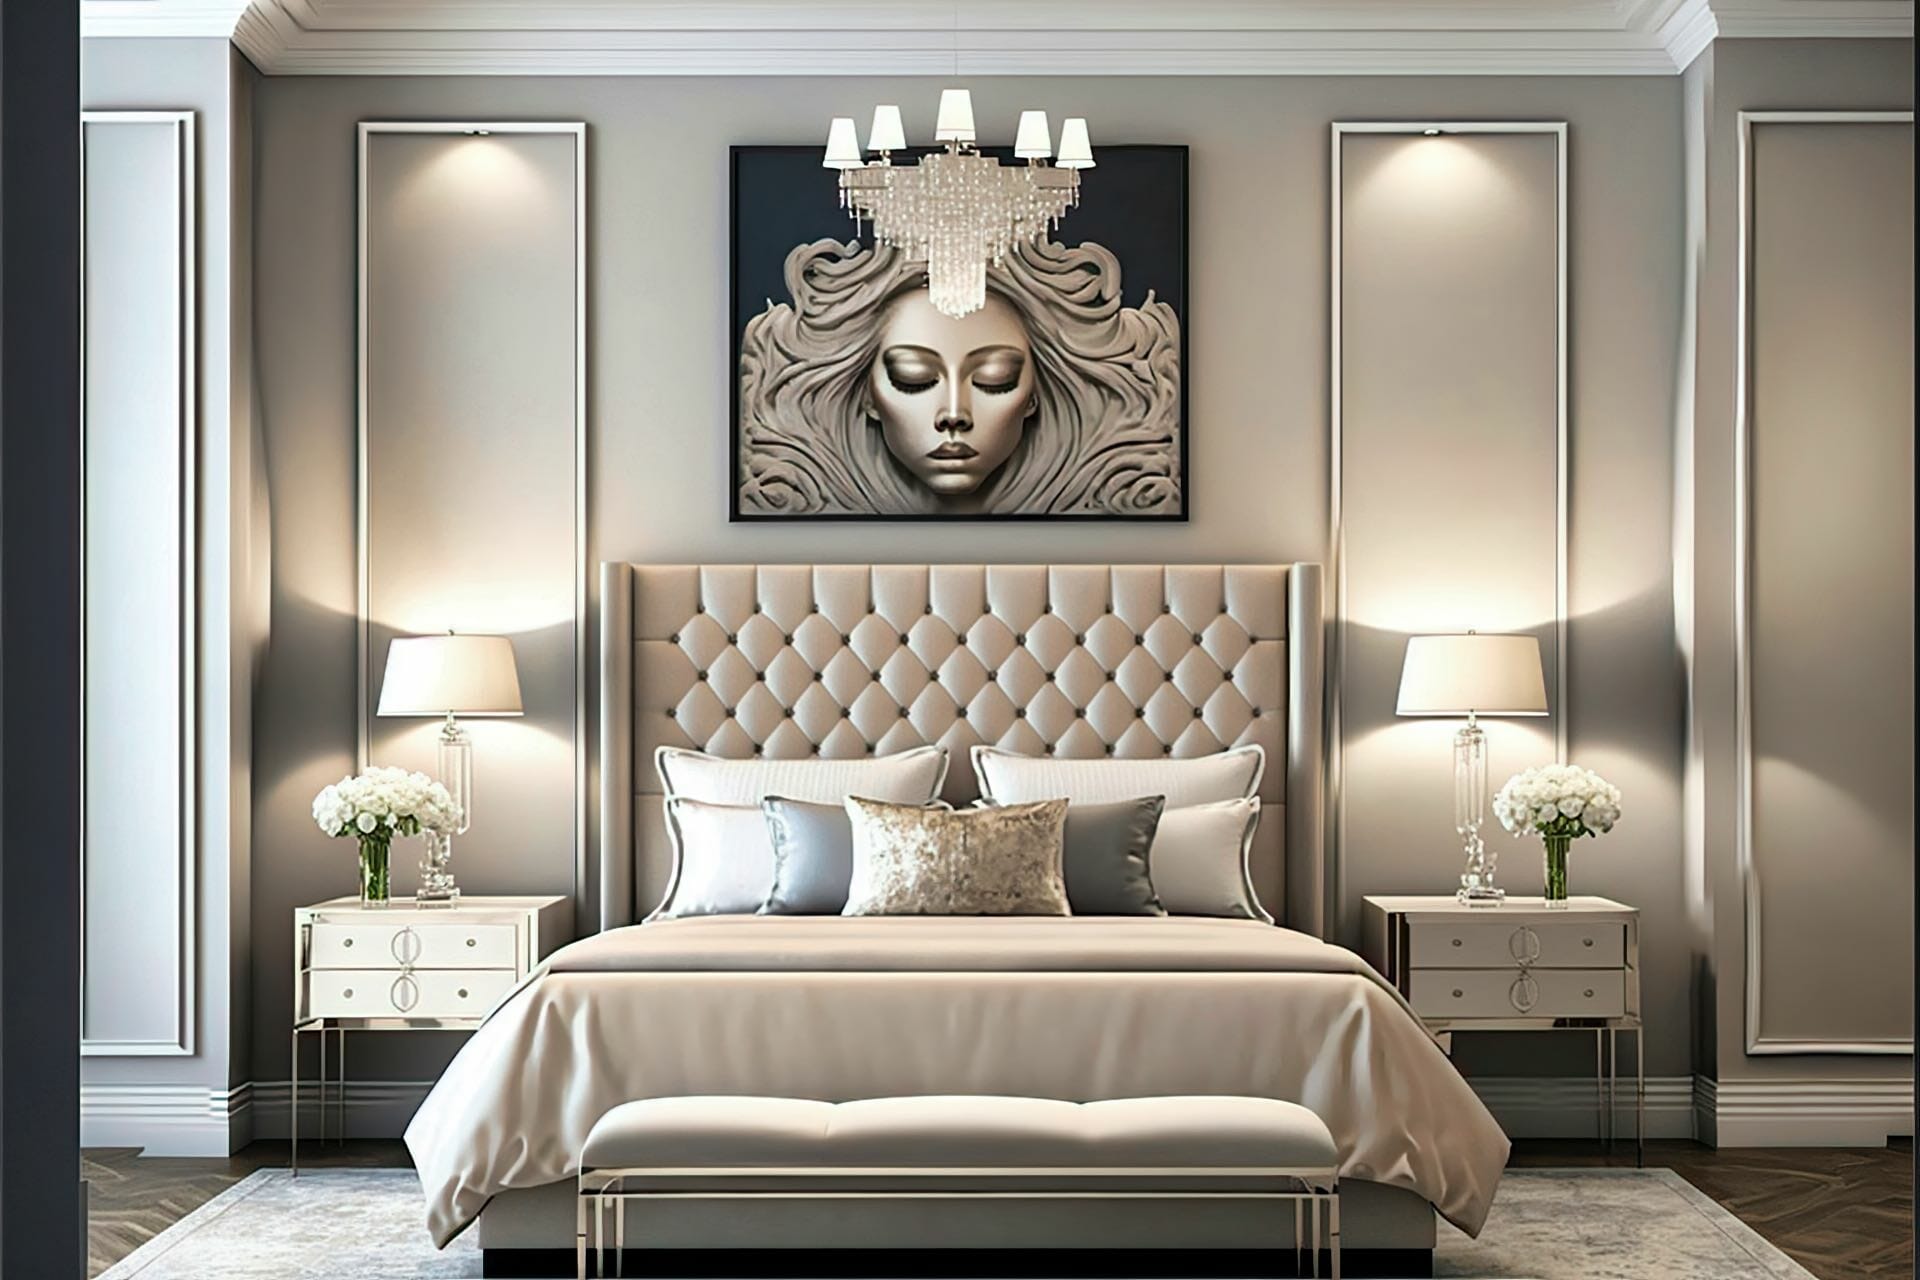 Luxurious And Glamorous Modern Style Bedroom Upscale